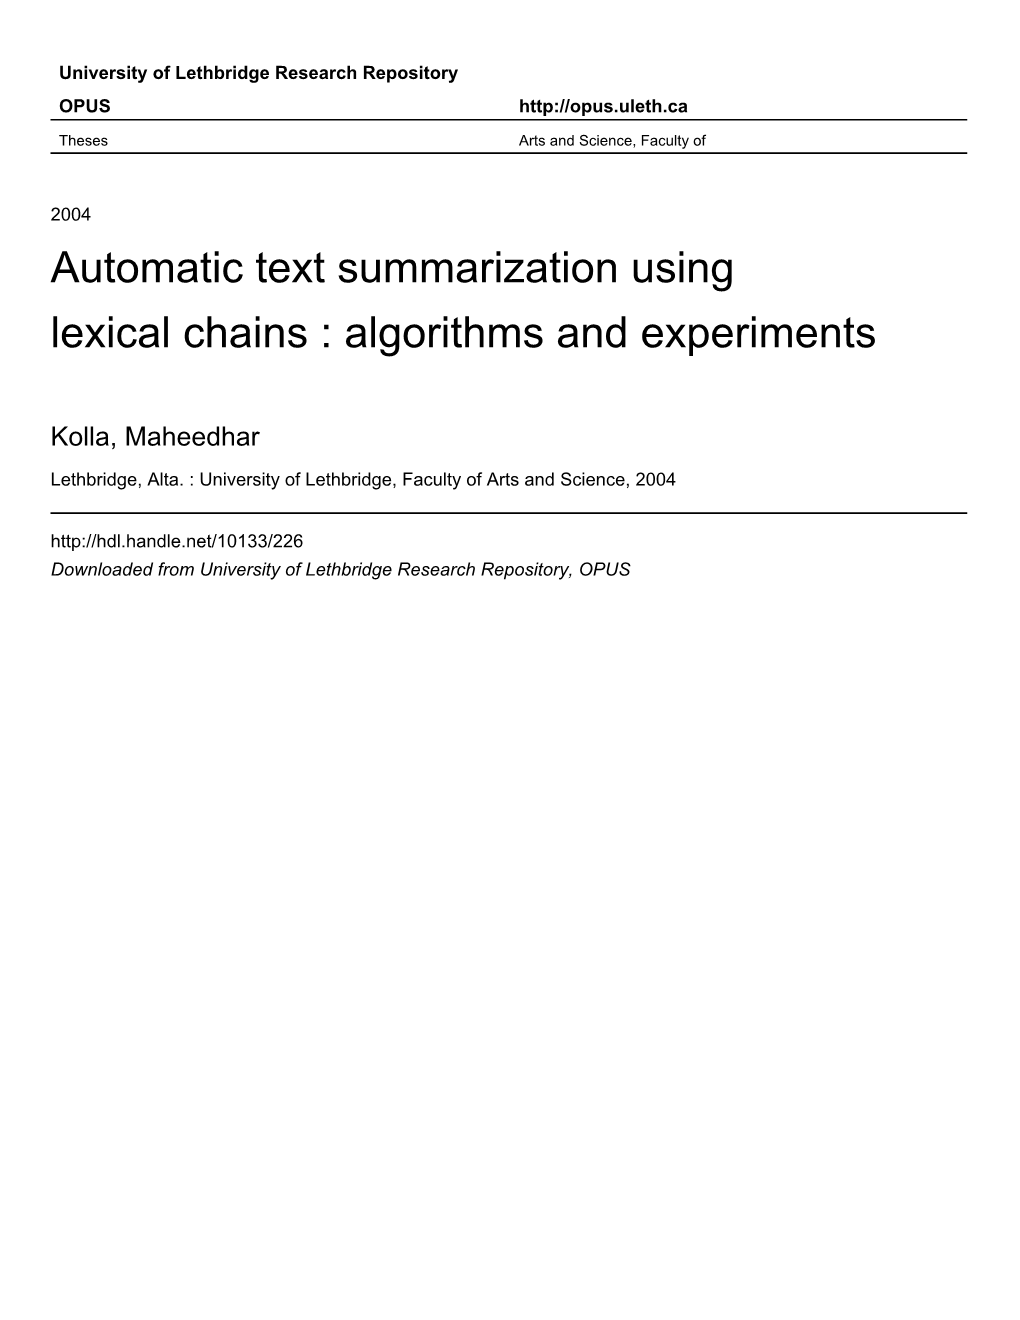 Automatic Text Summarization Using Lexical Chains : Algorithms and Experiments